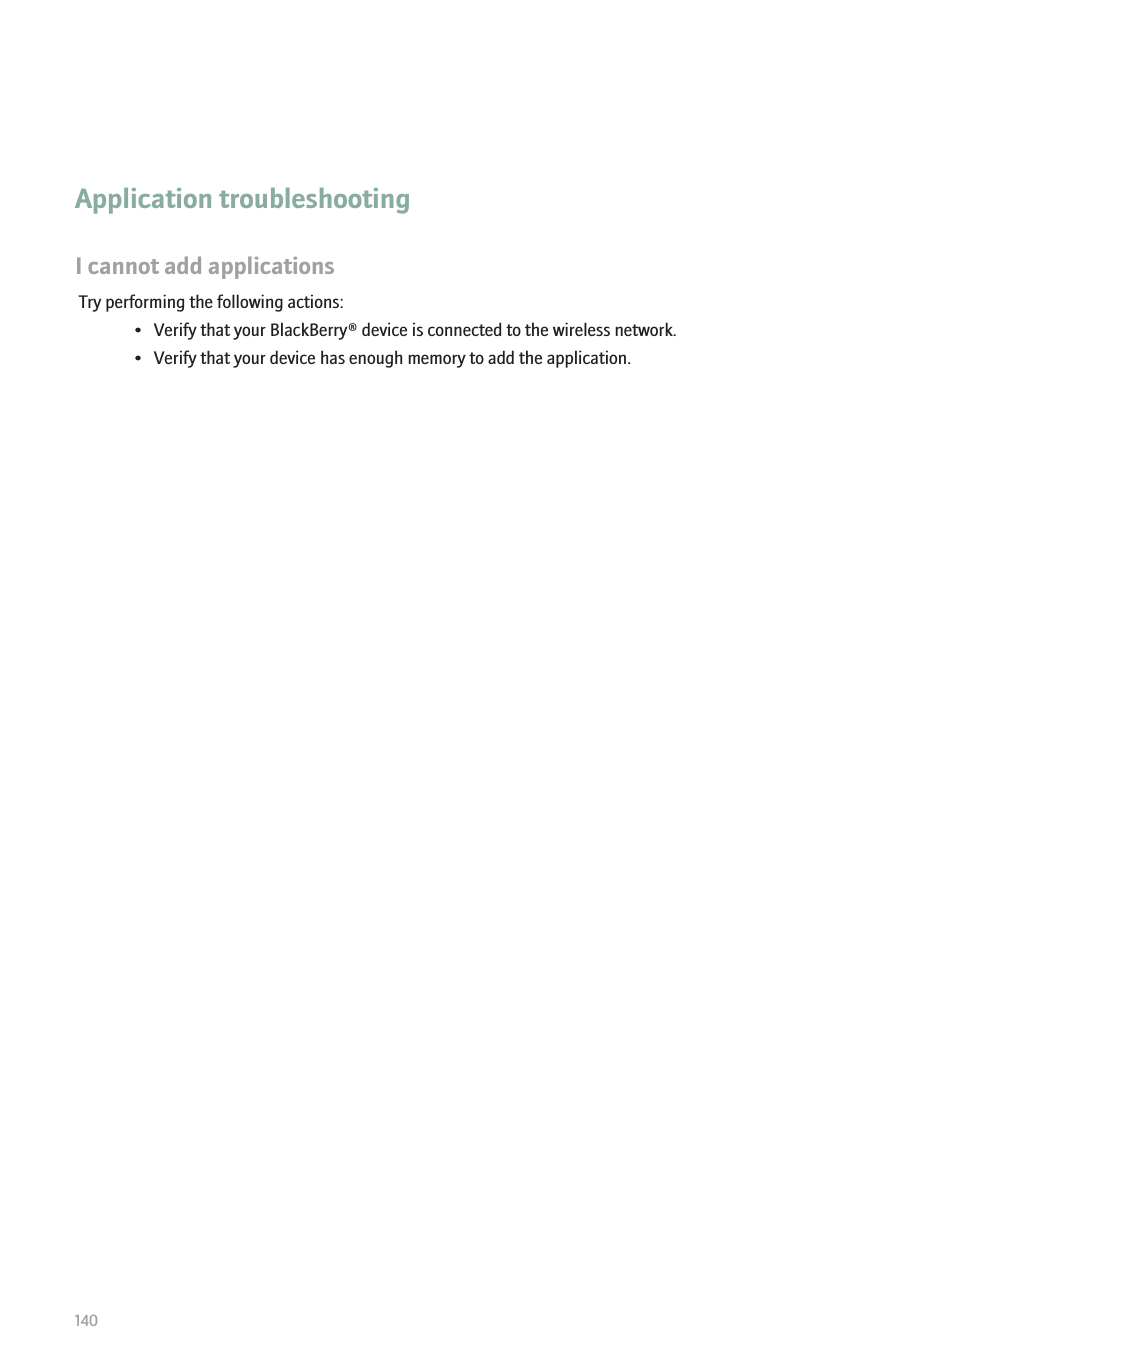 Application troubleshootingI cannot add applicationsTry performing the following actions:• Verify that your BlackBerry® device is connected to the wireless network.• Verify that your device has enough memory to add the application.140